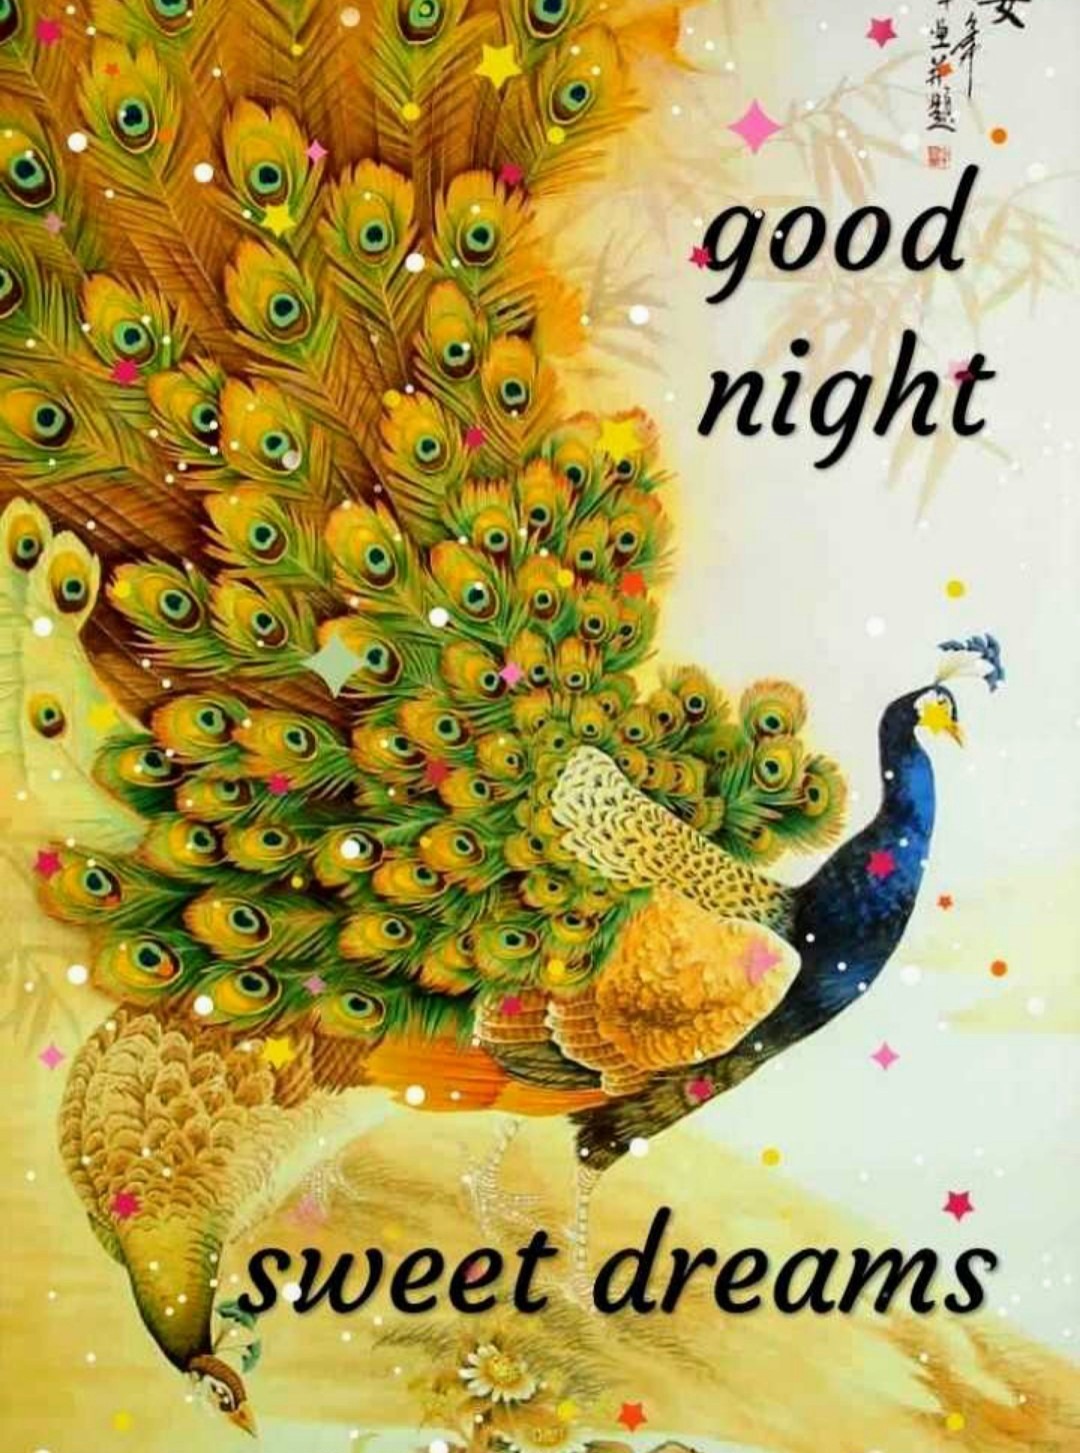 1470 Good Night Pictures Images Photos Page 9 Good night love quotes beautiful good night images good night prayer cute good night good night blessings good night messages good wish someone good night and sweet dreams with this nice ecard. 1470 good night pictures images